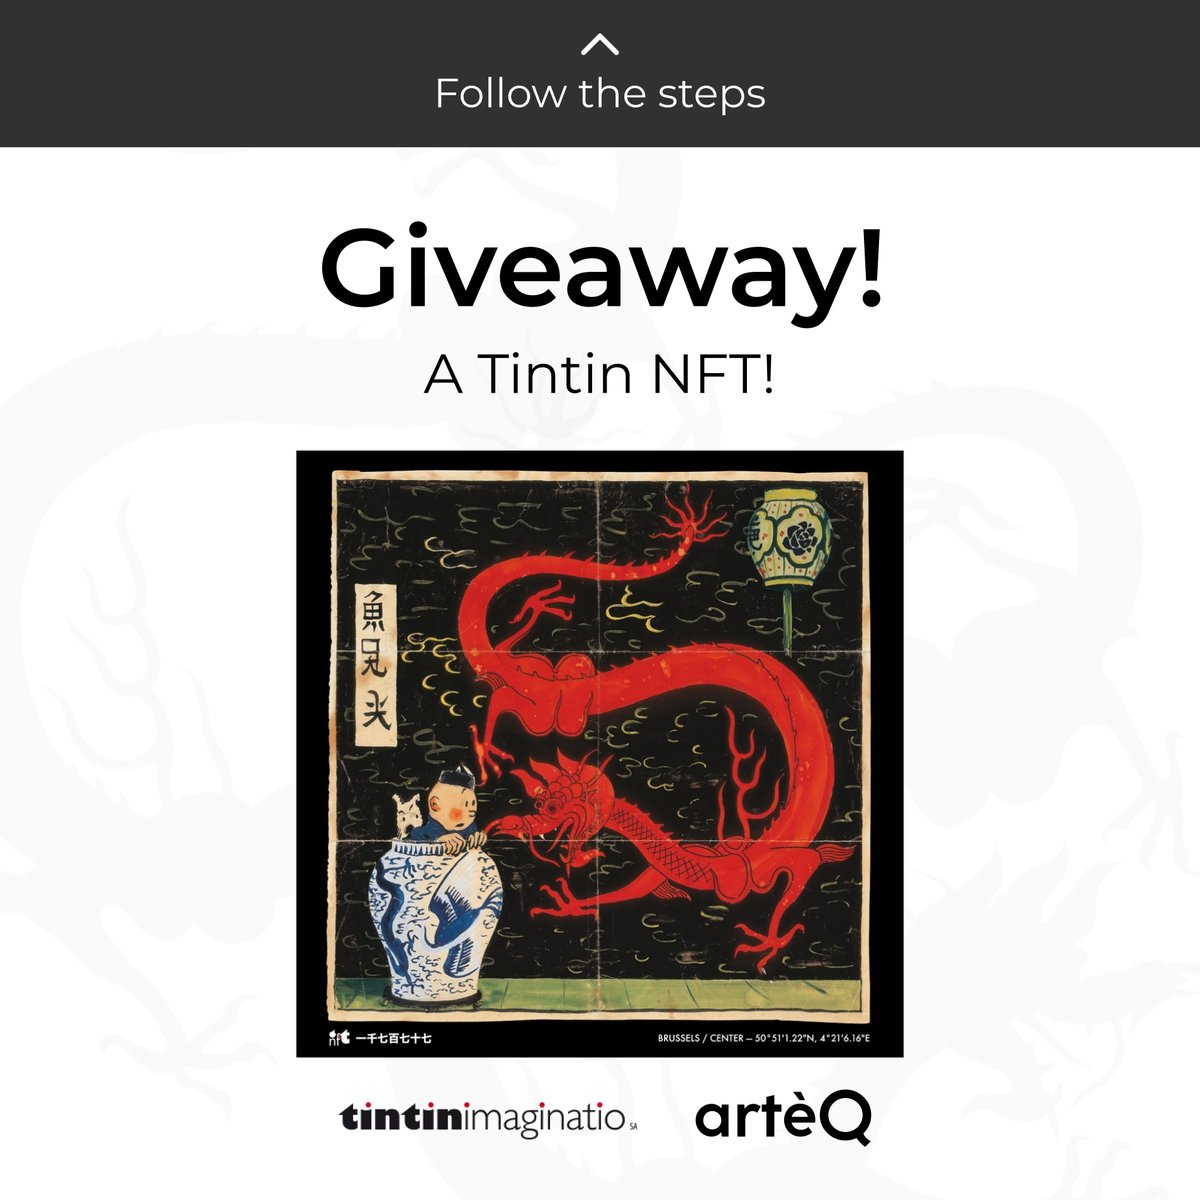 NFT Giveaway! 📢📢📢 To enter: 1. Follow @arteqio 2. Tag 2 friends 3. Retweet this post Prize: 1 Tintin NFT 🐉 {worth 0.25 ETH} Winner announcement: 17.04.2023 Good Luck! - Public Mint is live at digital.tintin.com #TintinNFT #Giveaway #NFTGiveaway #TokenGiveaways…